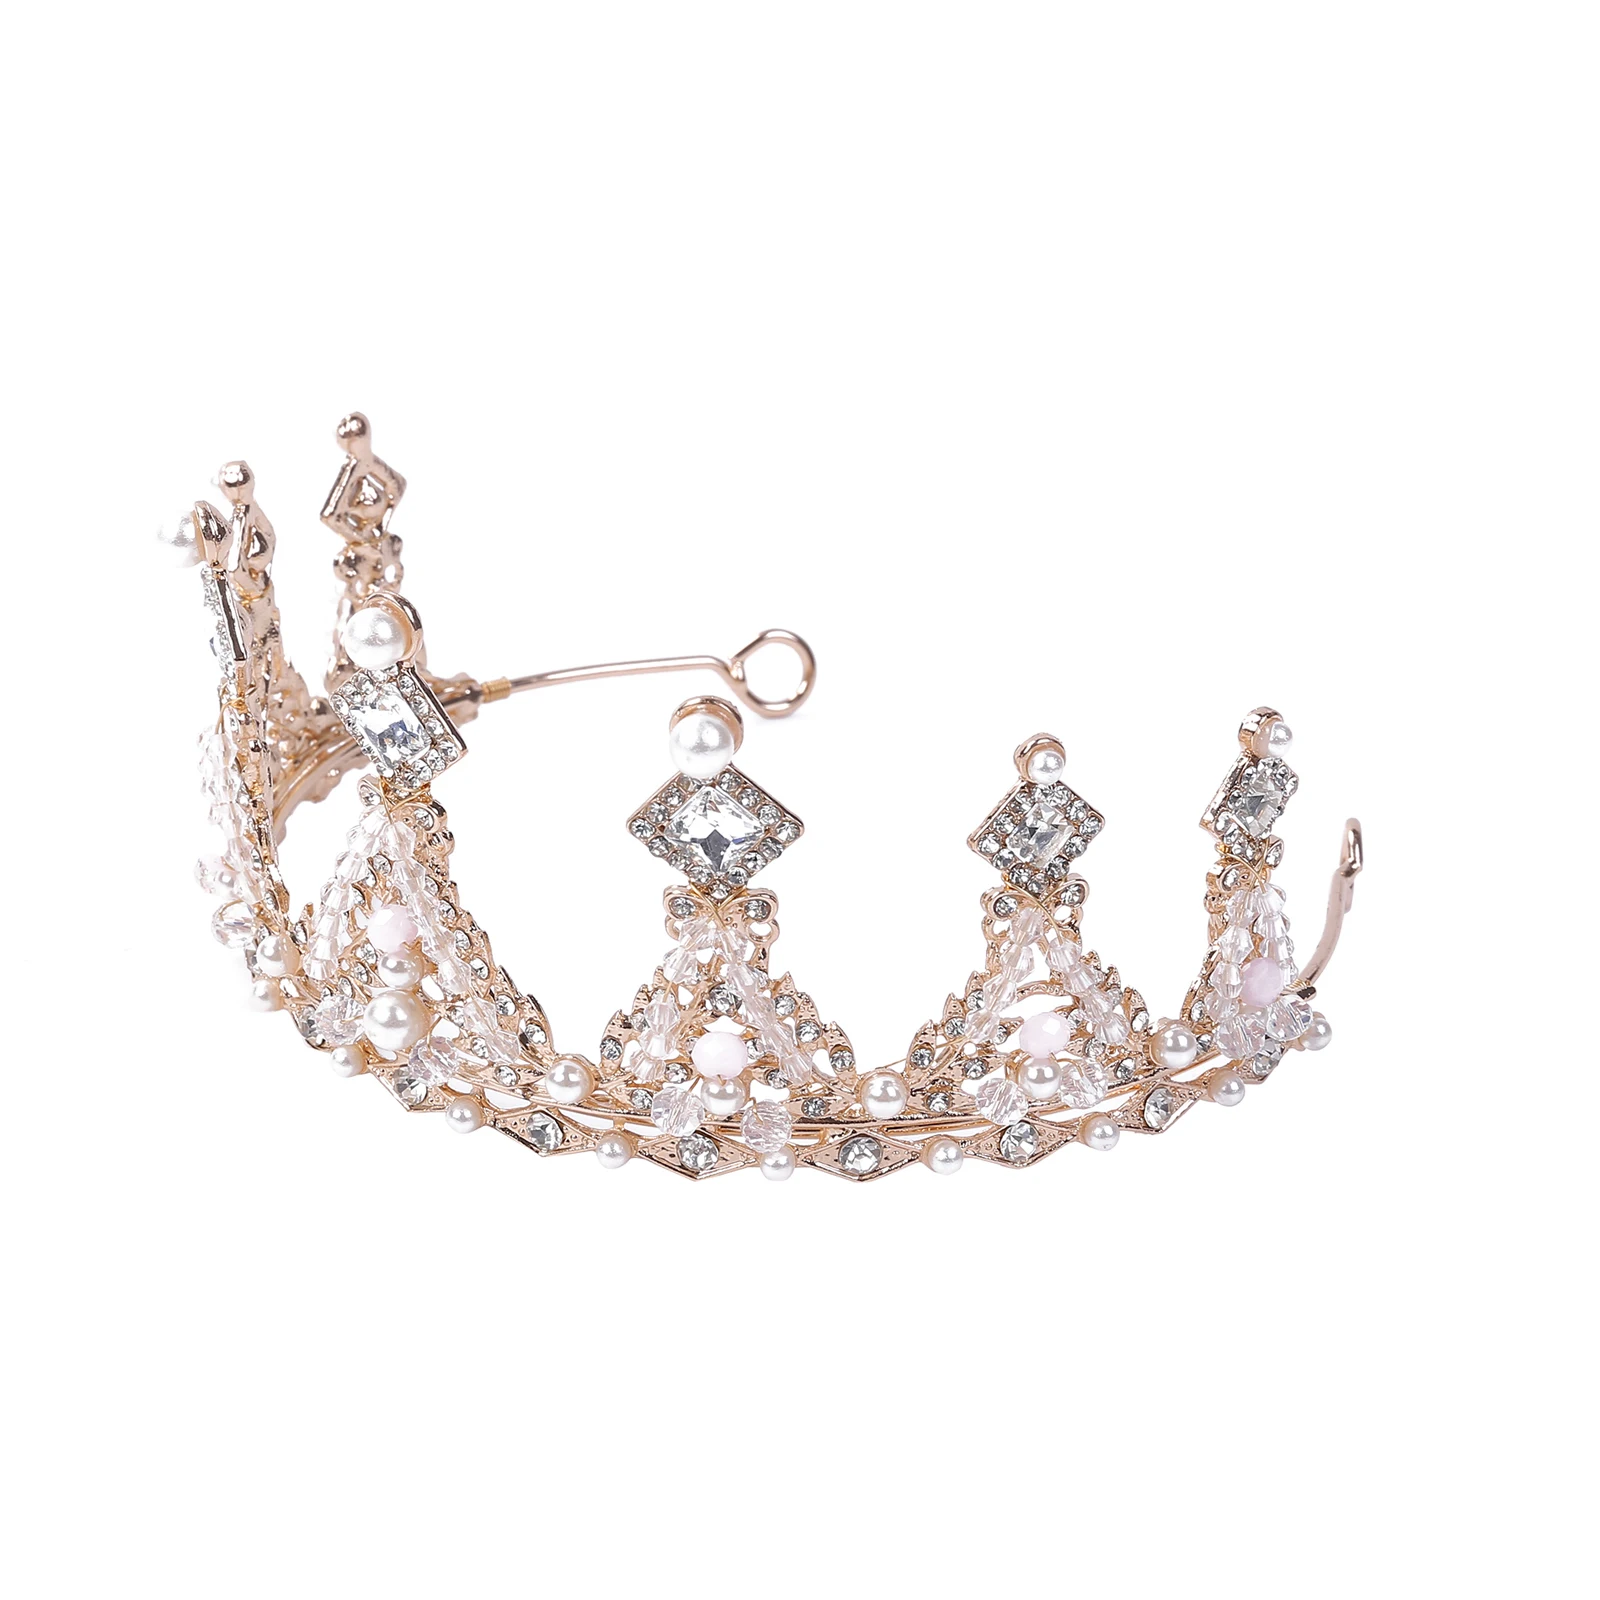 2022 Girl Head Hoop Princess Crown Design Shiny Rhinestone Inlaid Exquisite Eye-catching Head Jewelry Headband Party Headwear baby accessories coloring pages	